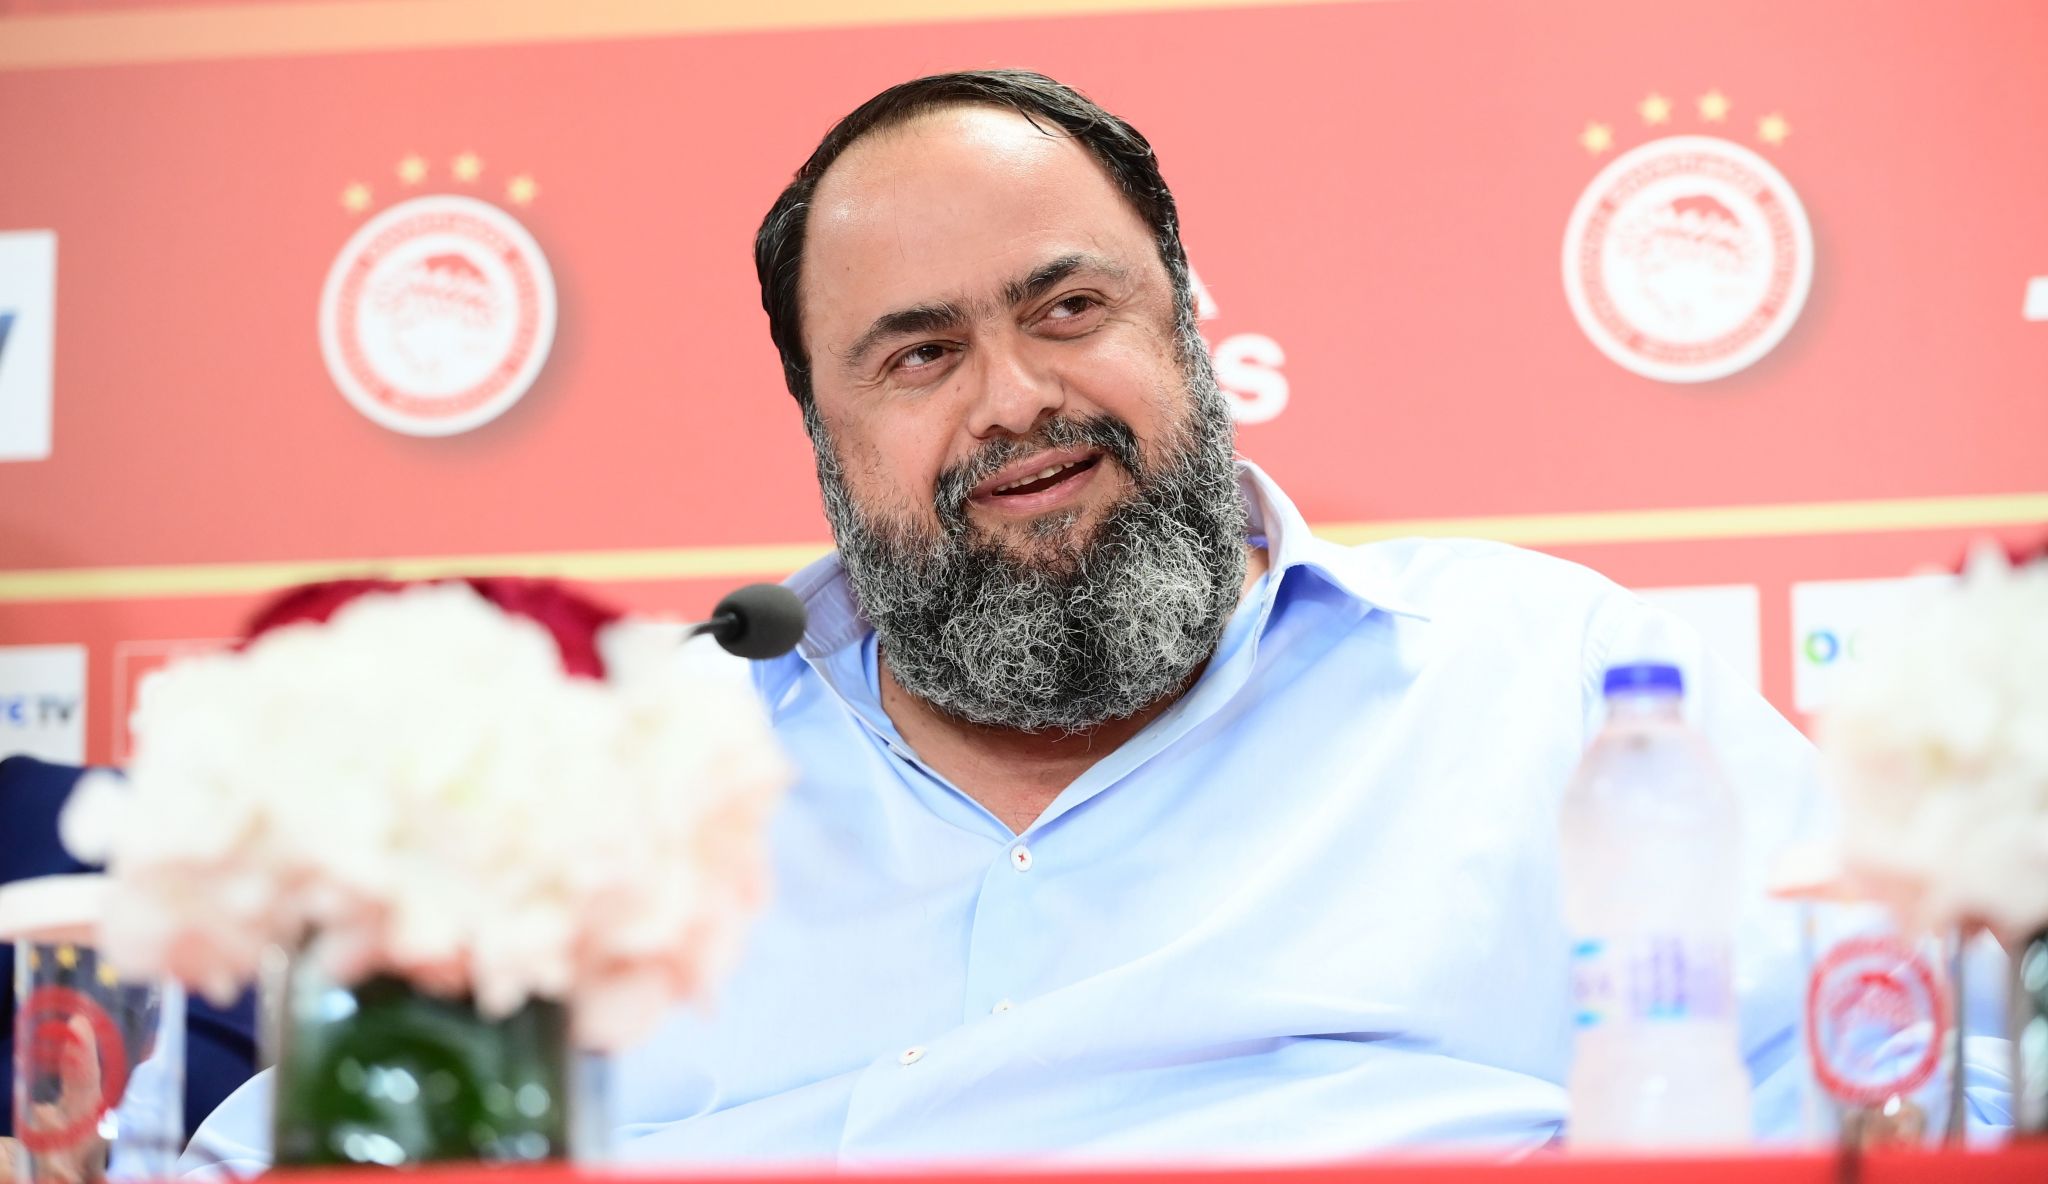 Evangelos Marinakis: “Everybody stands by Olympiacos, in a calm and supportive way”